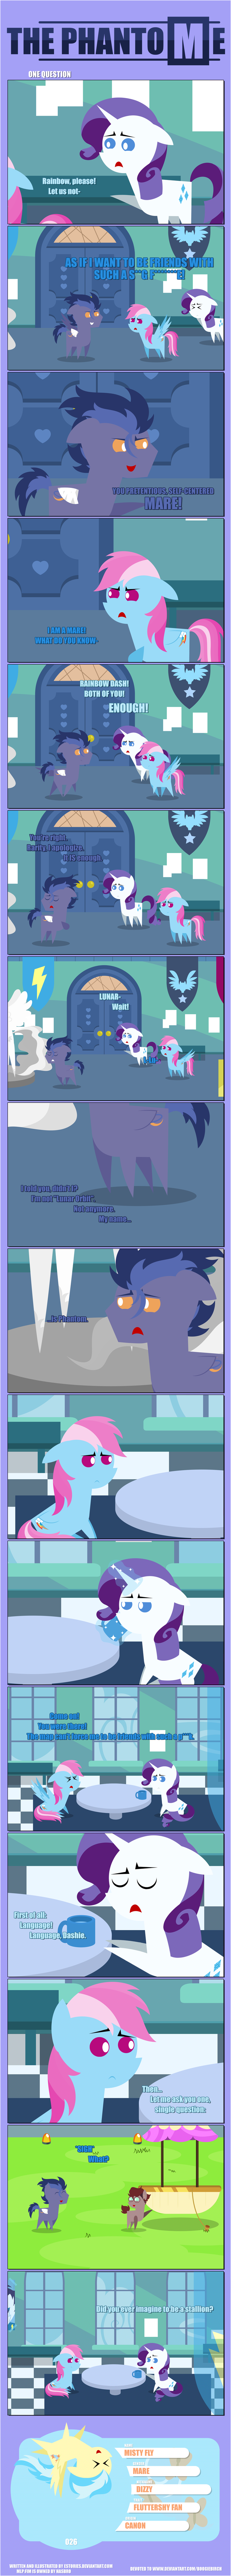 Page 24 - ONE QUESTION